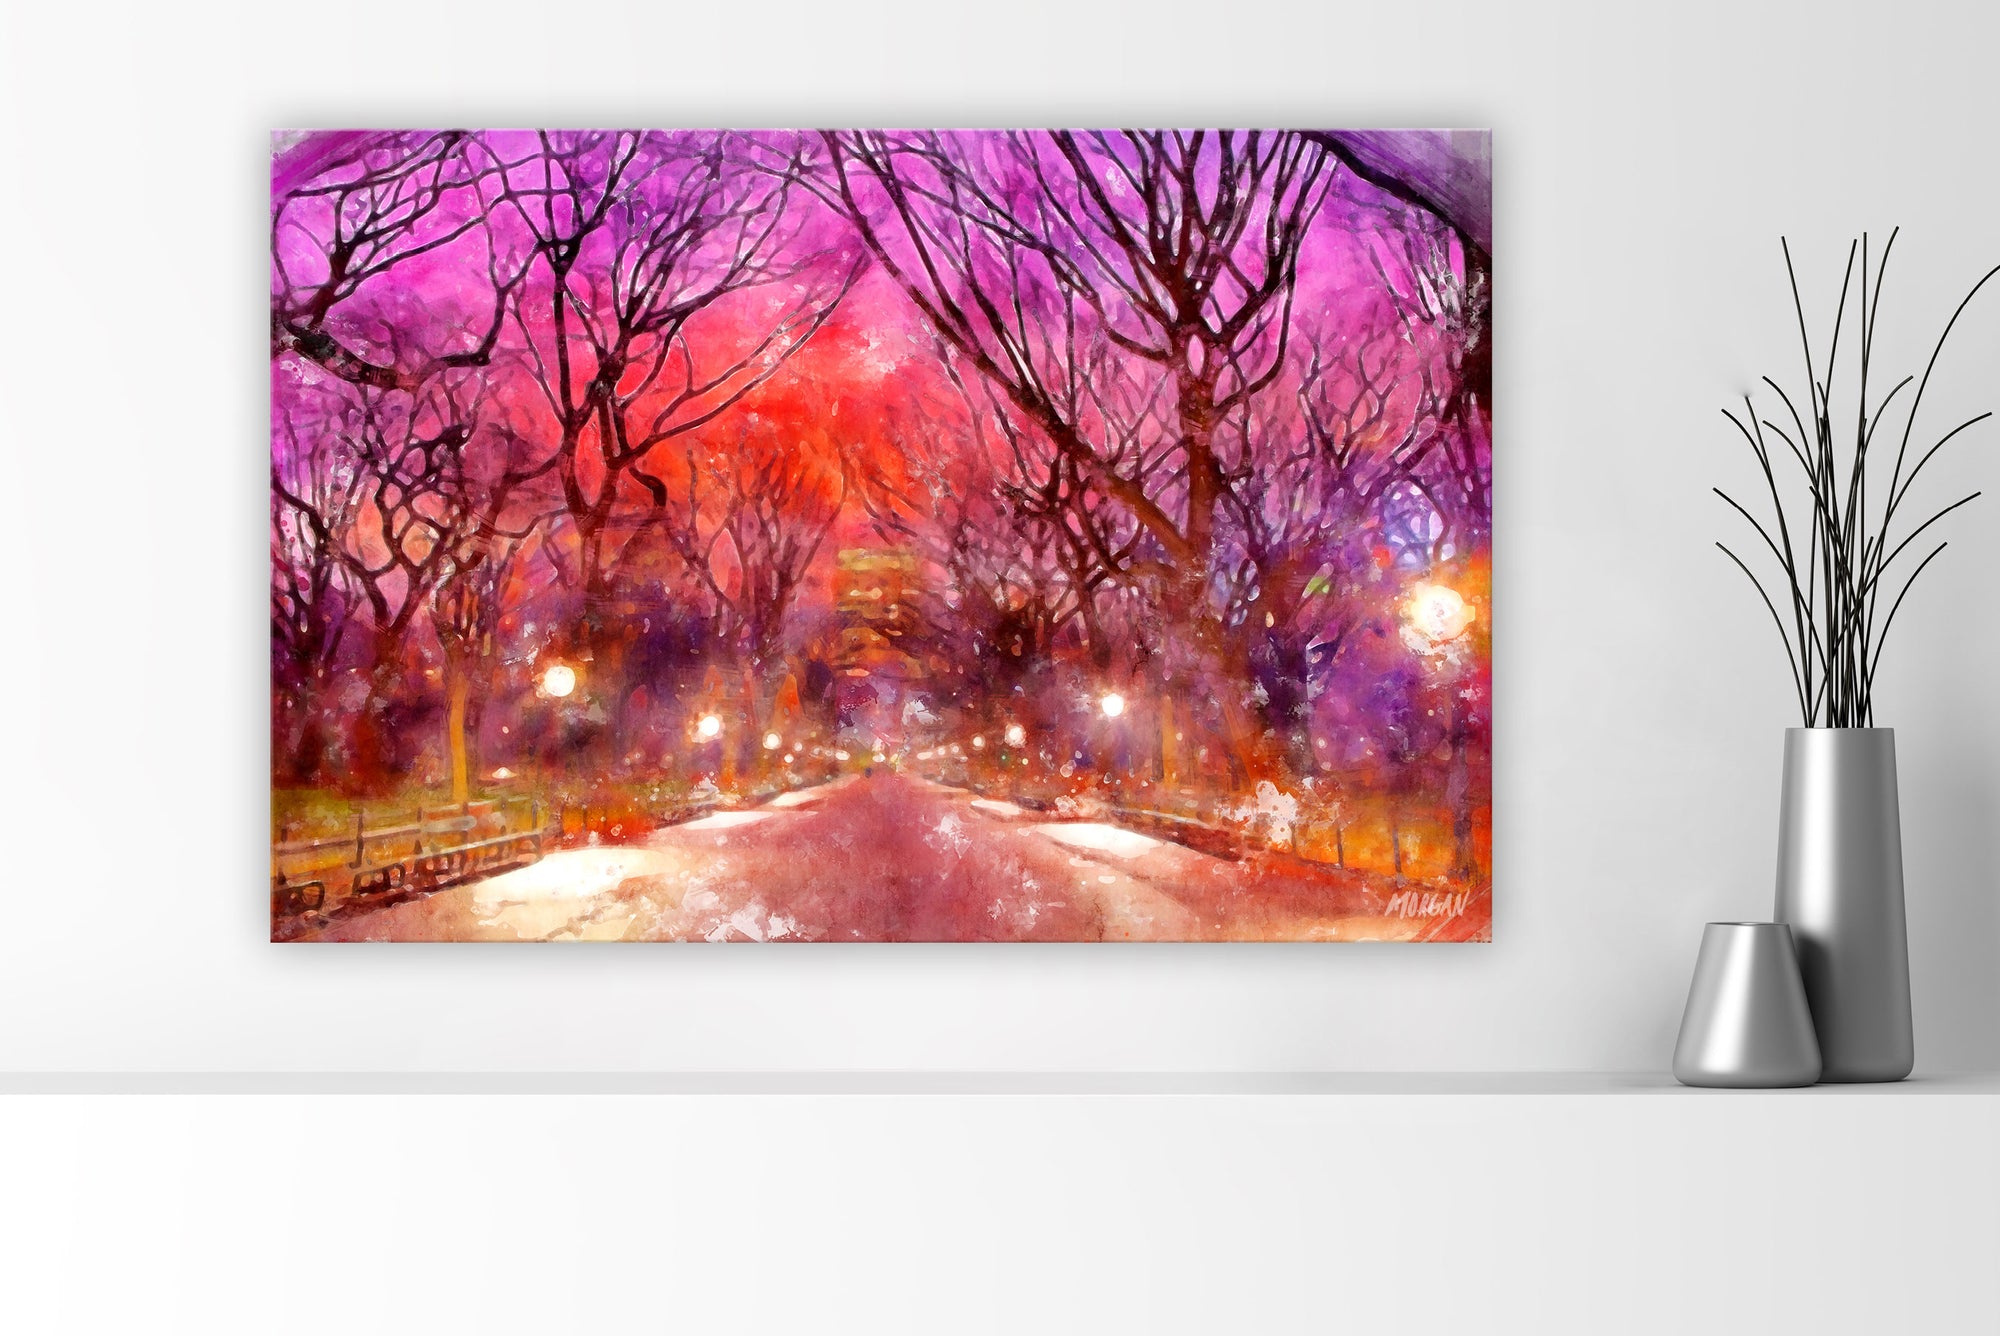 Poets Walk in Evening - Central Park Canvas NYC